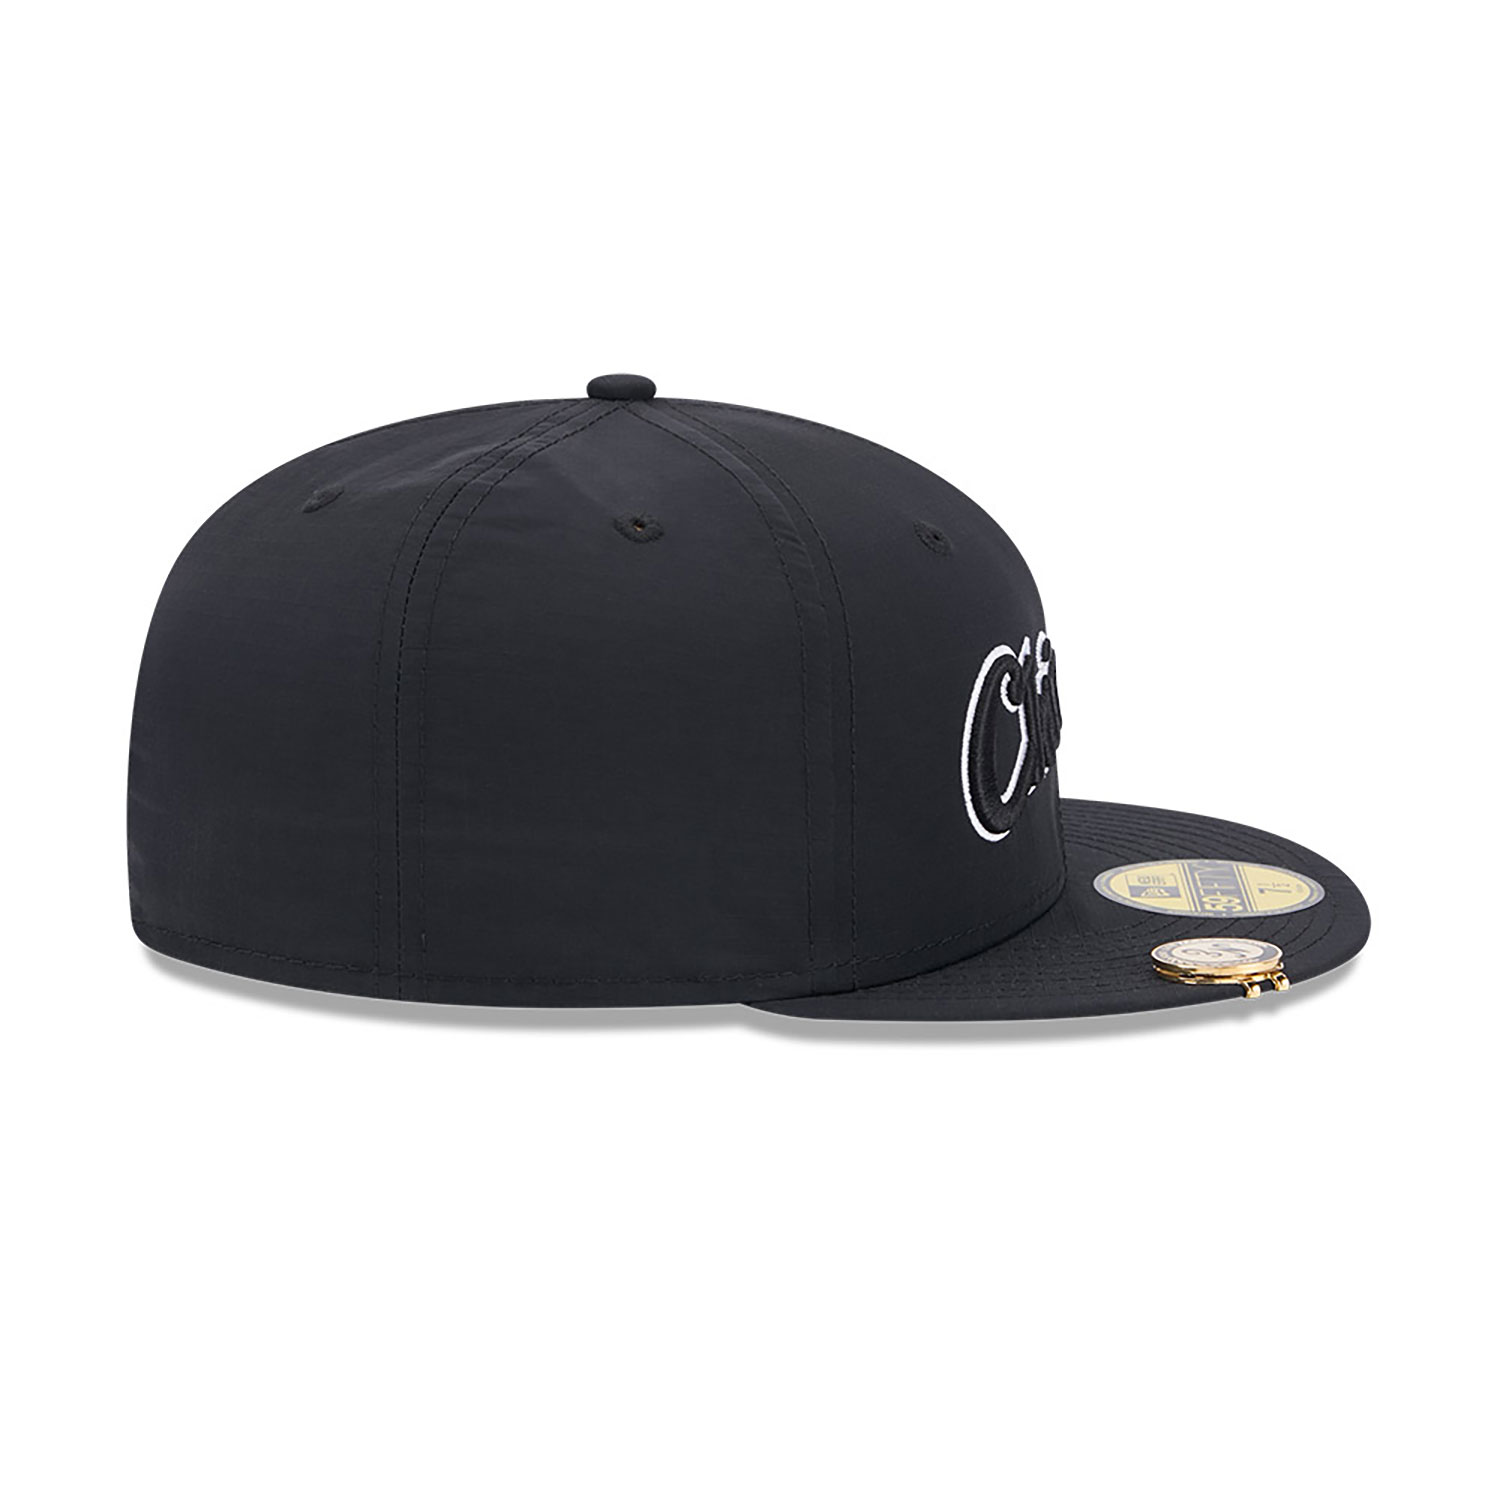 Chicago White Sox Fairway Black 59FIFTY Fitted Cap